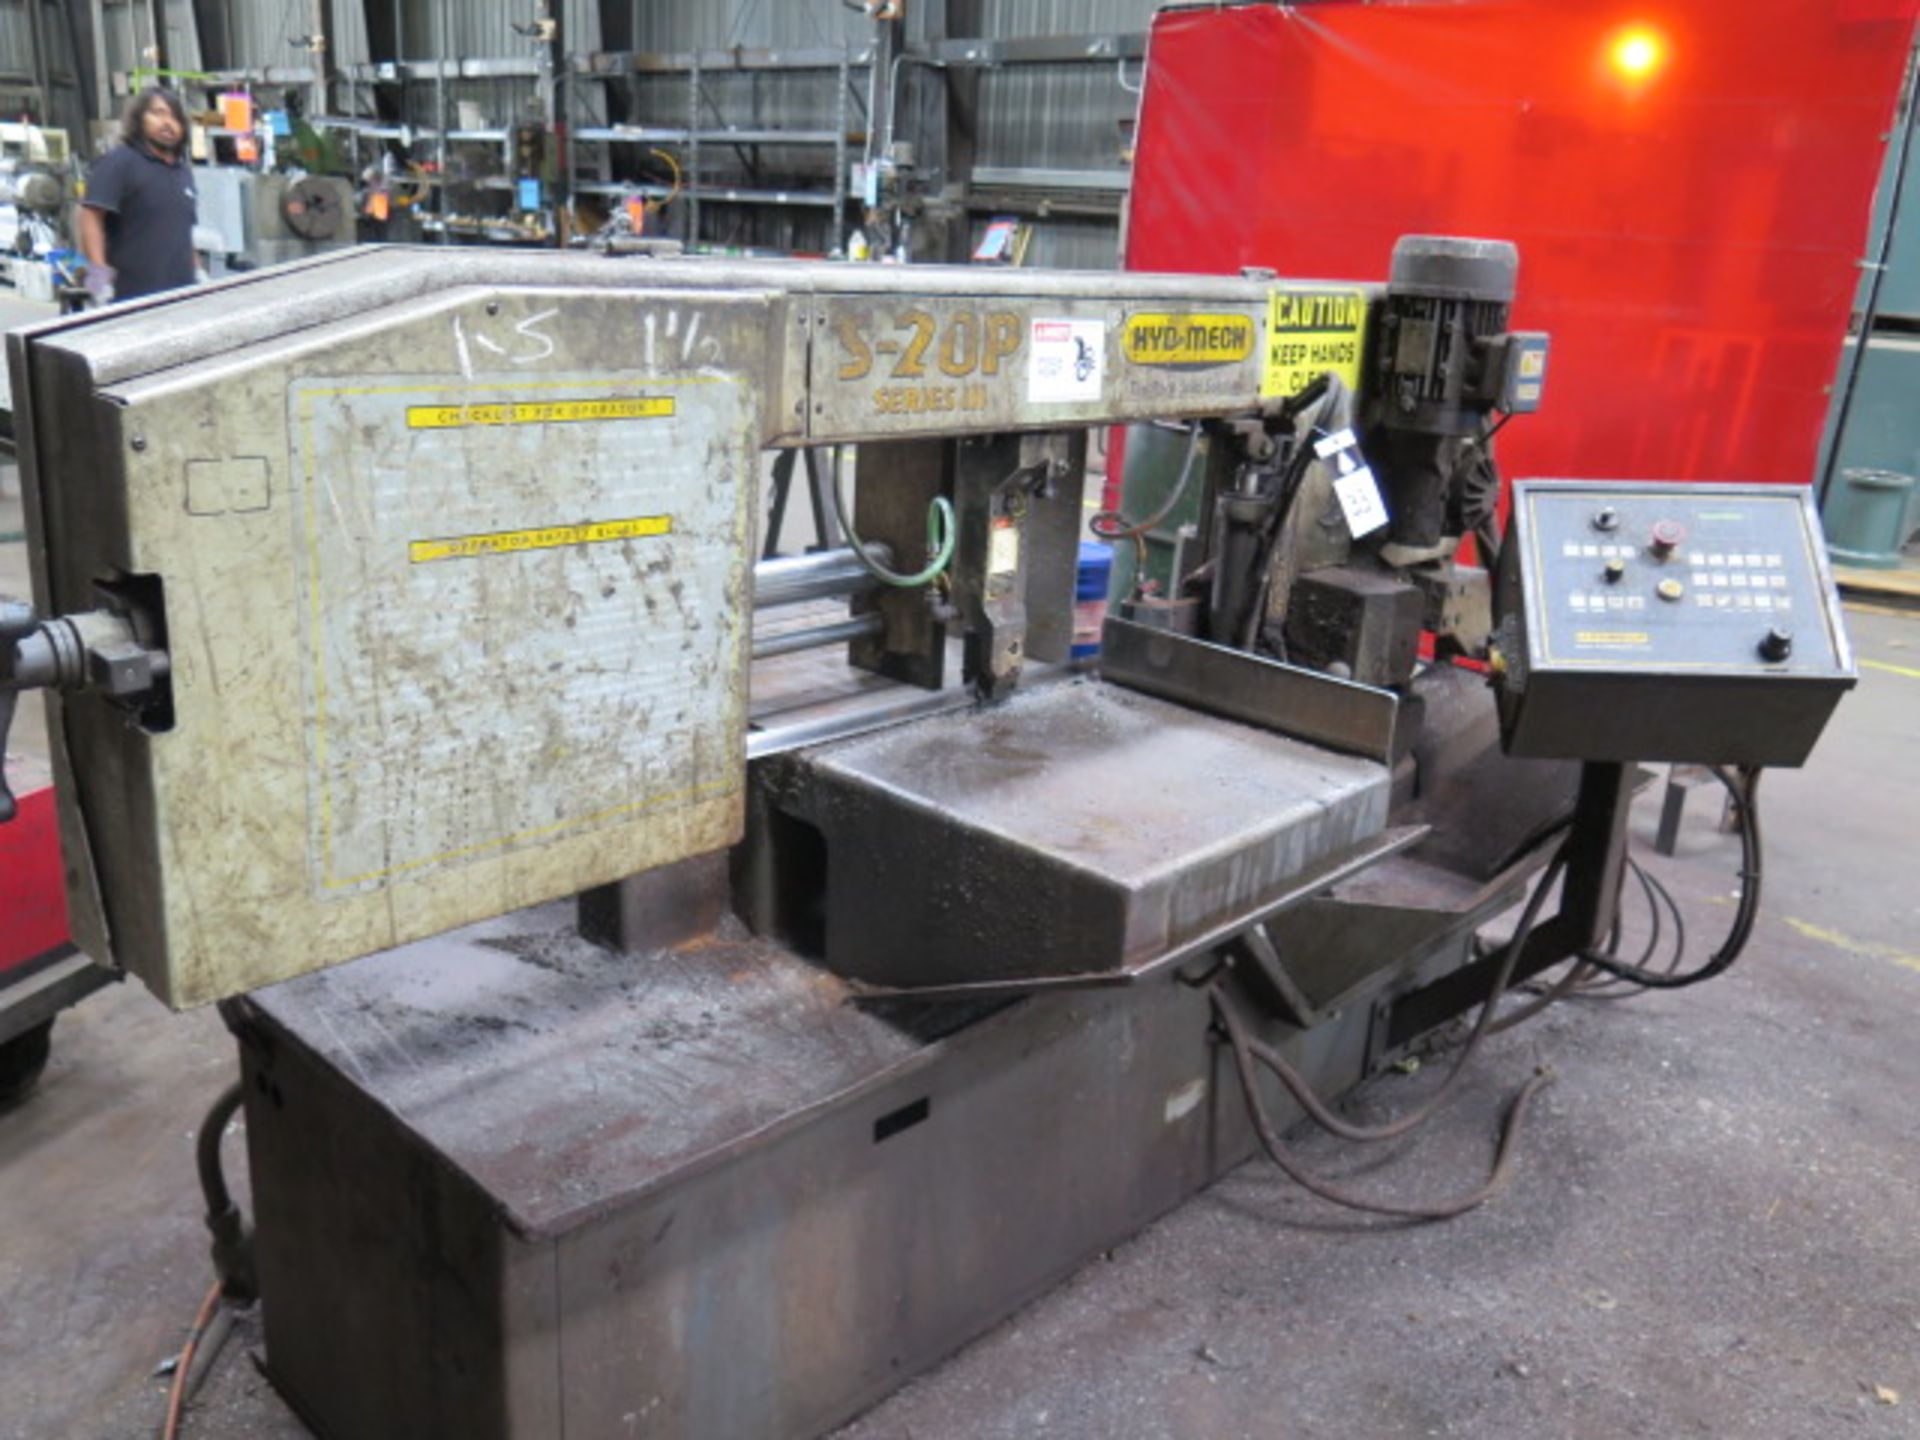 Hyd-Mech S-20P Series III 13” Horizontal Band Saw w/ Hyd-Mech Controls, Hyd Clamping, SOLD AS IS - Image 3 of 11